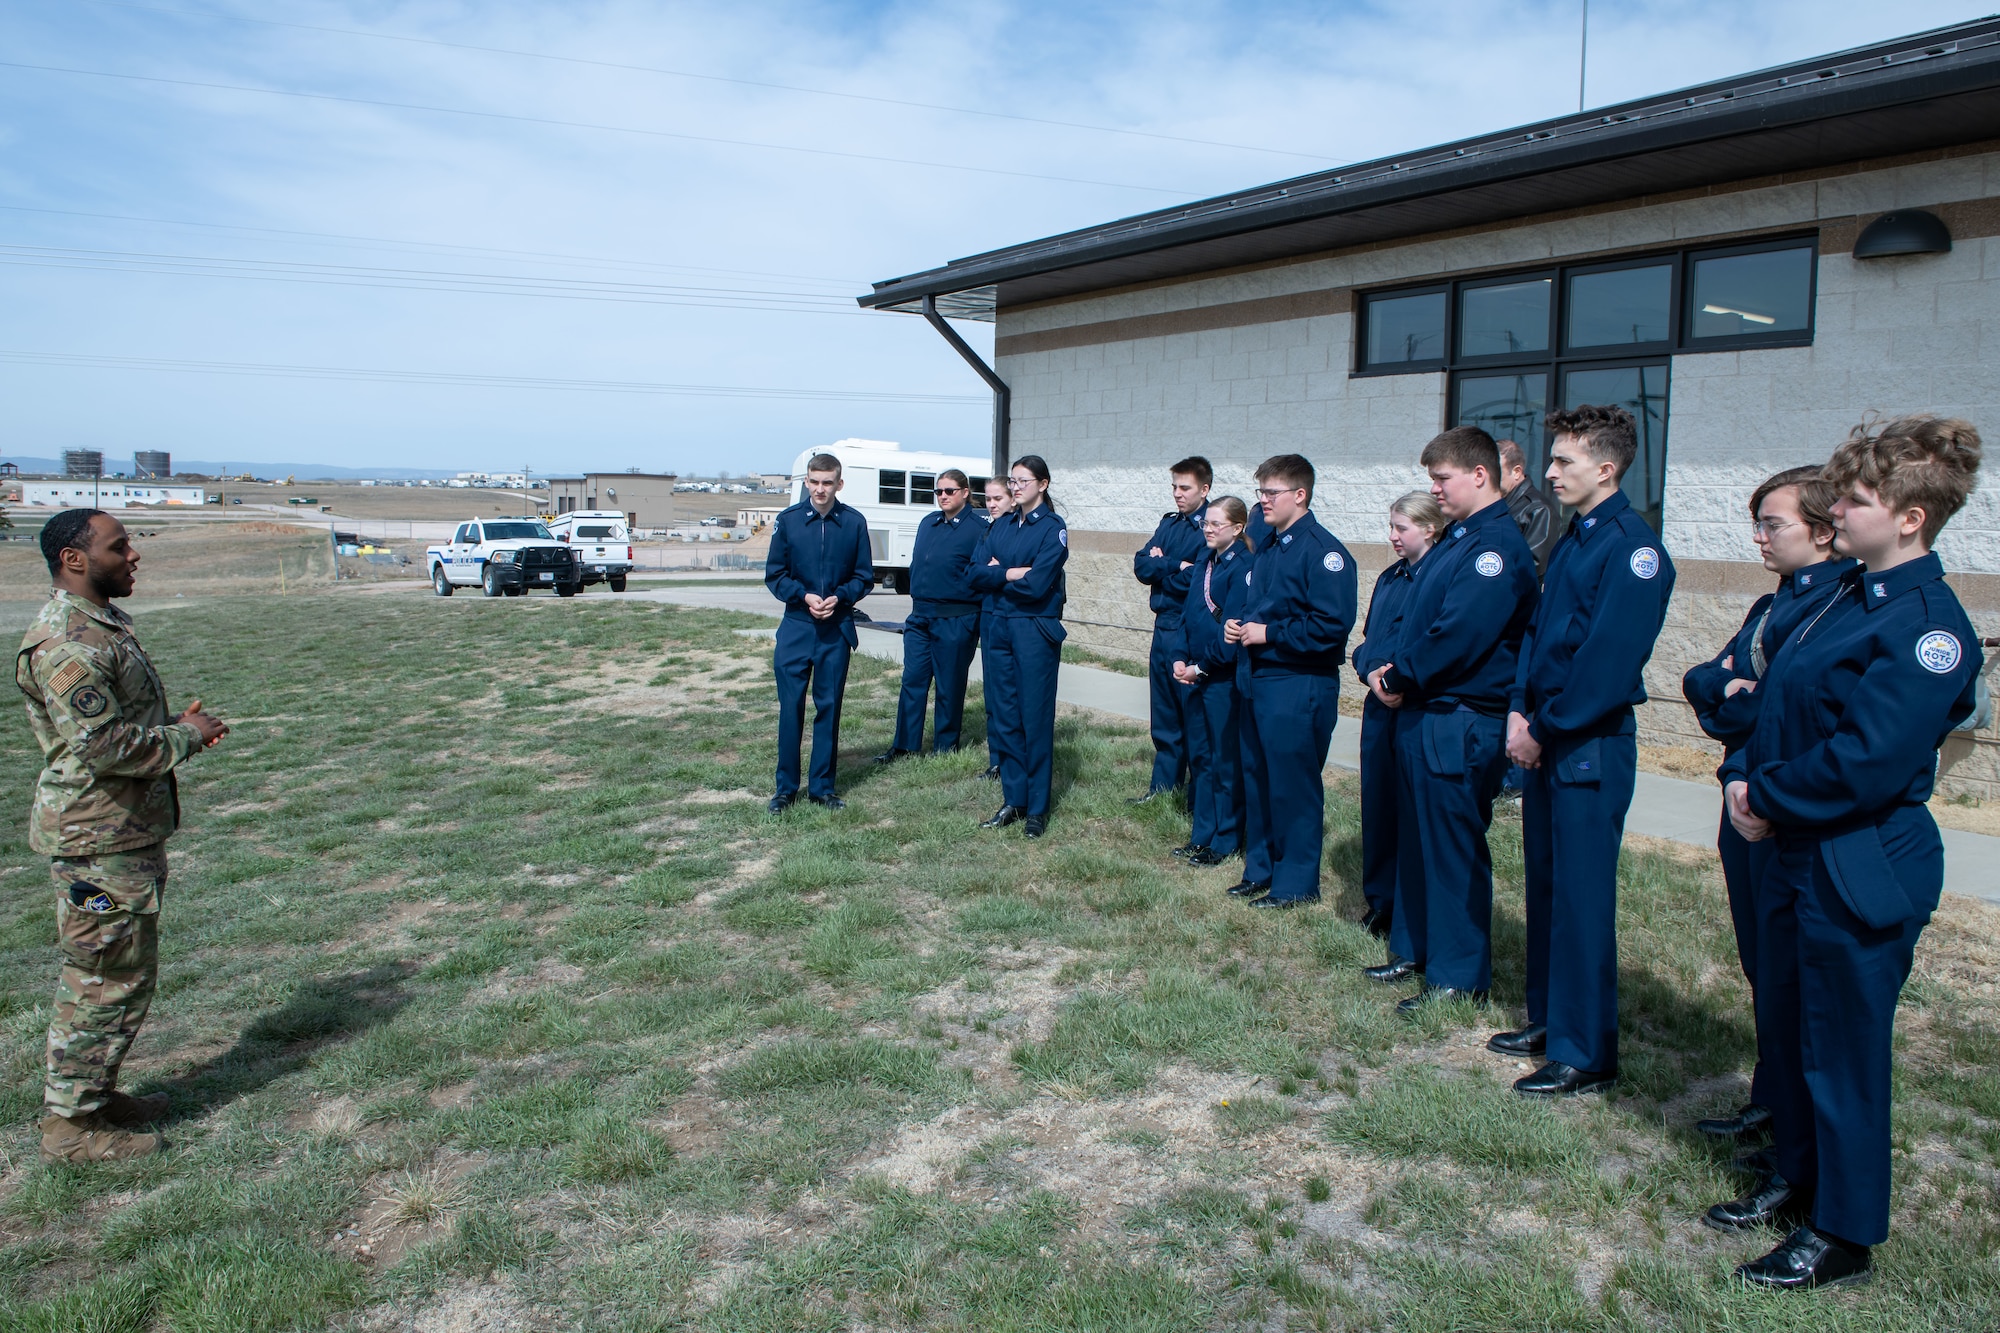 Students with the Douglas High School Air Force Junior Reserve Officer Training Corps view a demonstration from the Security Forces K-9 division on Ellsworth Air Force Base, S.D., April 19, 2022. K-9 handlers are security forces personnel that have received specialized training at Lackland Air Force Base, Texas. (U.S. Air Force Photo by Airman 1st Class Adam Olson)